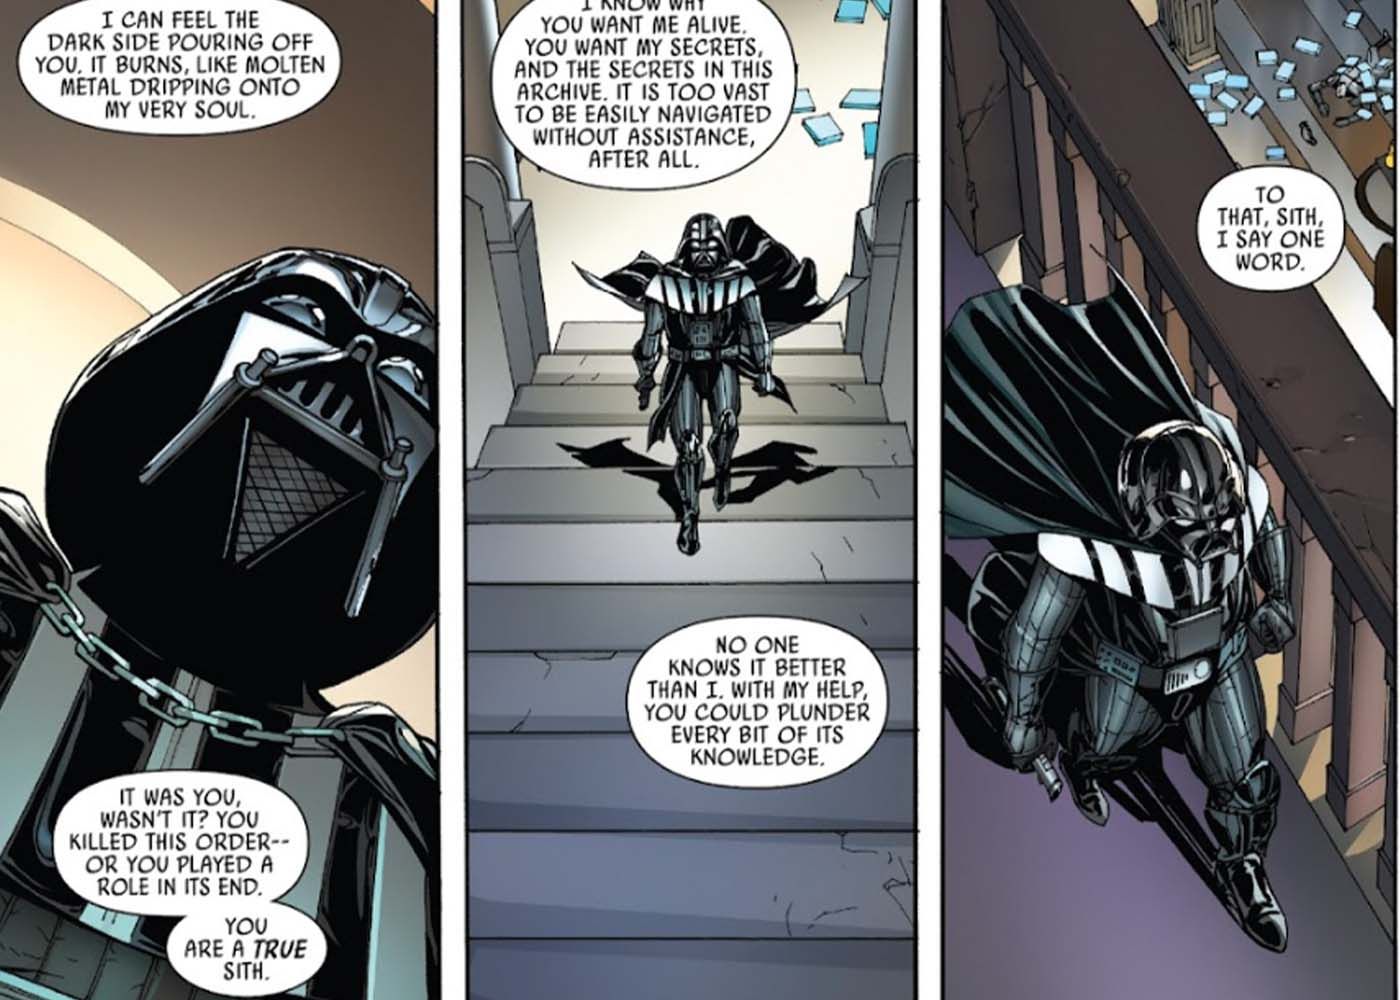 Star Wars Revealed Why Darth Vader Is So Strong - He Absorbed Dead